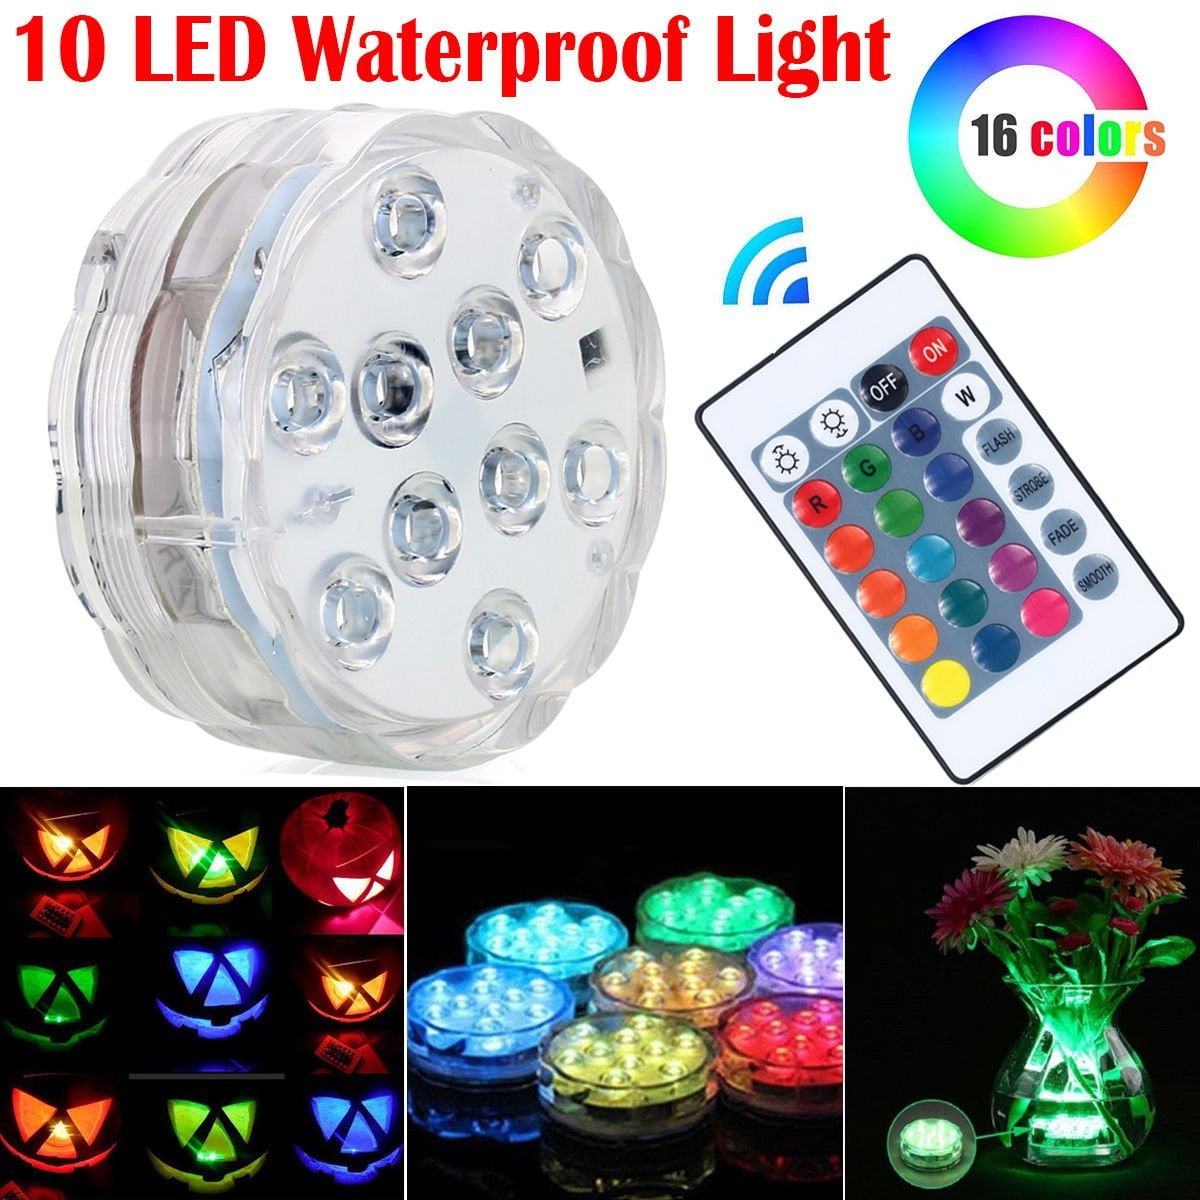 Details about   2-10 Pack 10 LED submersible Waterproof Wedding Party Vase Base RGB Light Remote 